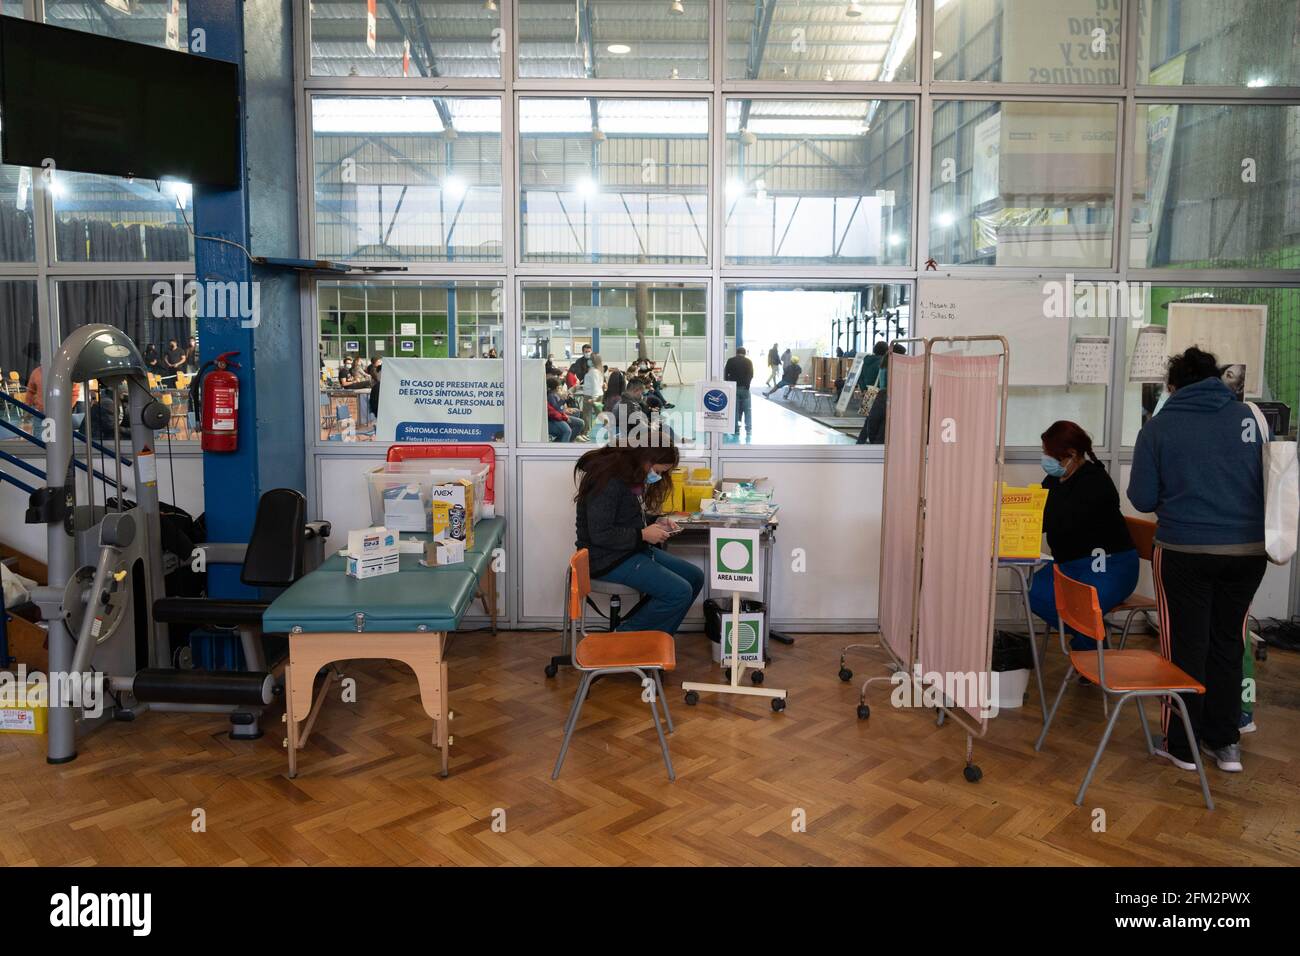 Santiago, Metropolitana, Chile. 5th May, 2021. Health workers vaccinate against covid with the Sinovac vaccine, in a municipal gym converted into a vaccination center in Ã‘uÃ±oa, Chile. Credit: Matias Basualdo/ZUMA Wire/Alamy Live News Stock Photo